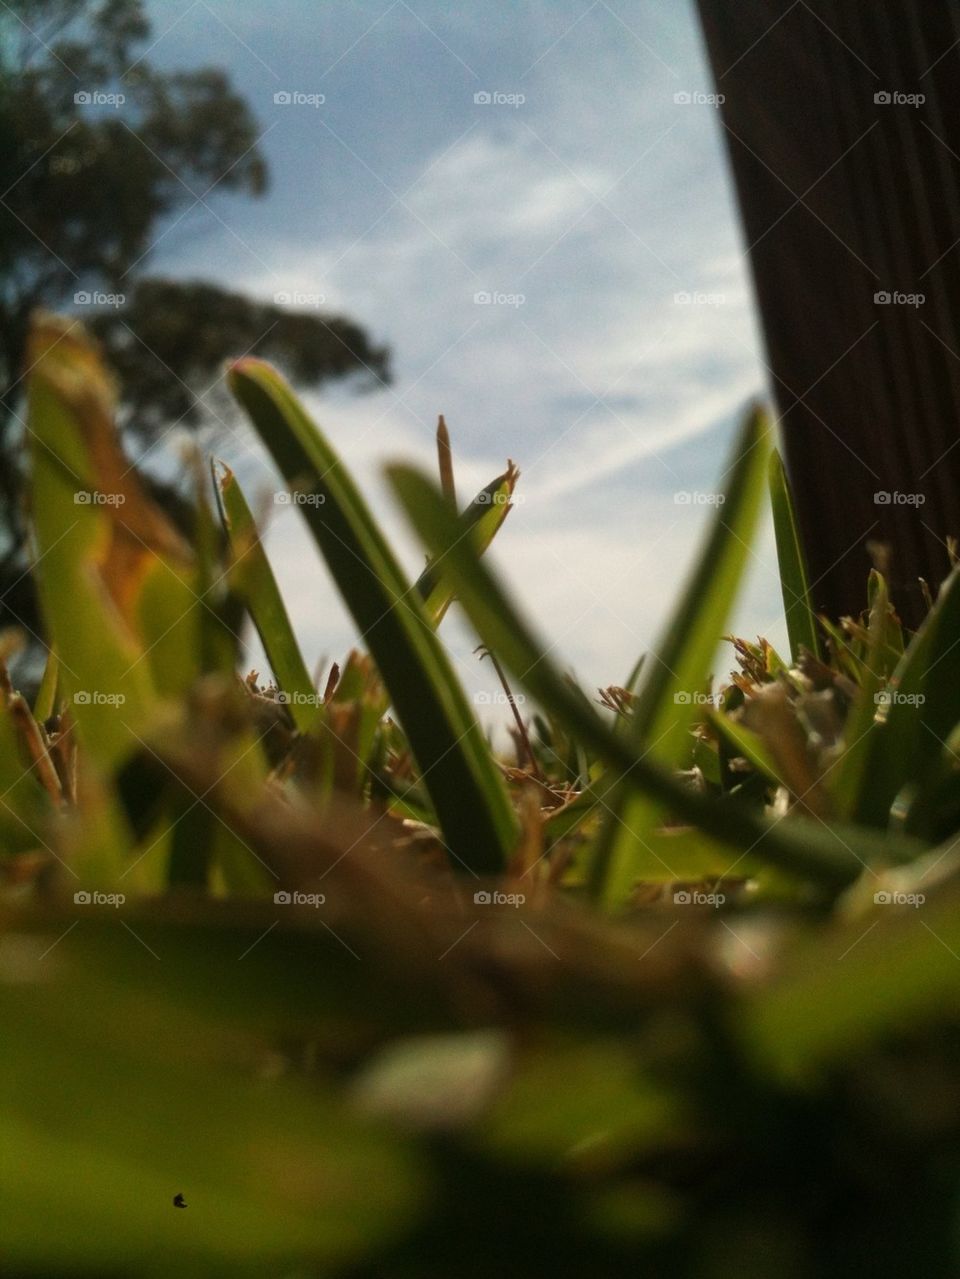 Ant view